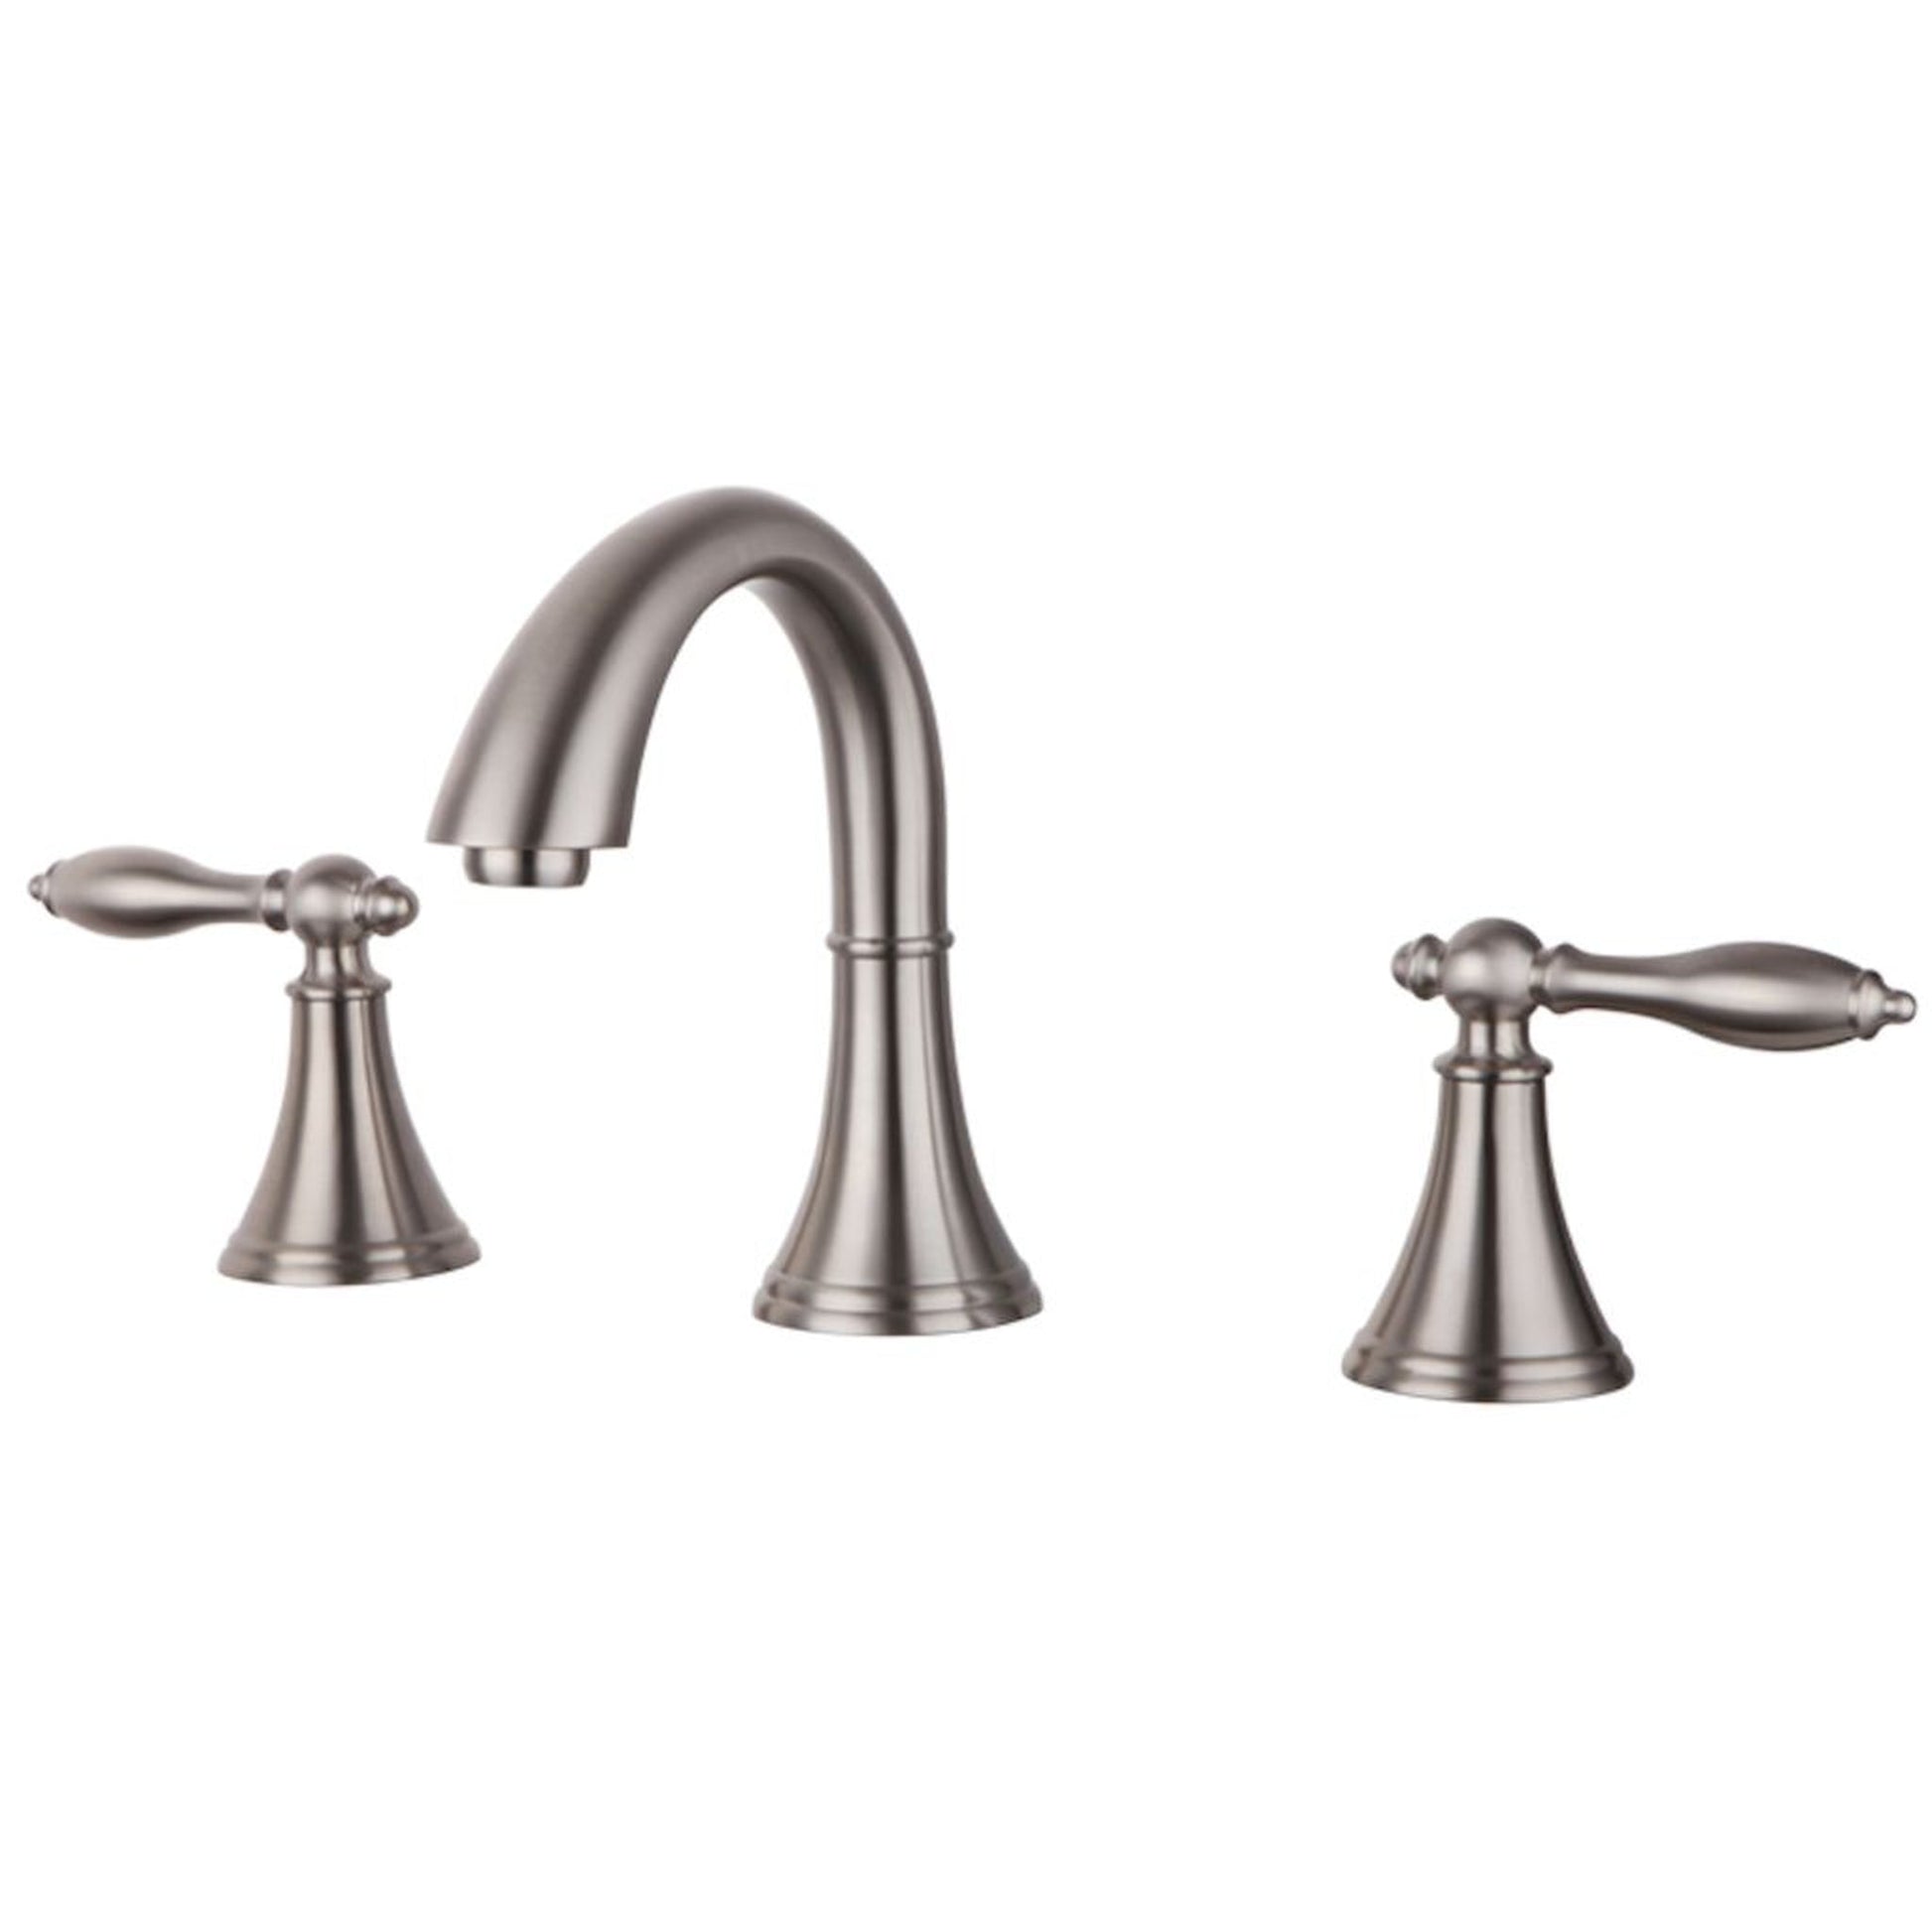 Blossom F01 115 5" x 6" Brushed Nickel 8" Widespread Lever Handle Bathroom Sink Faucet